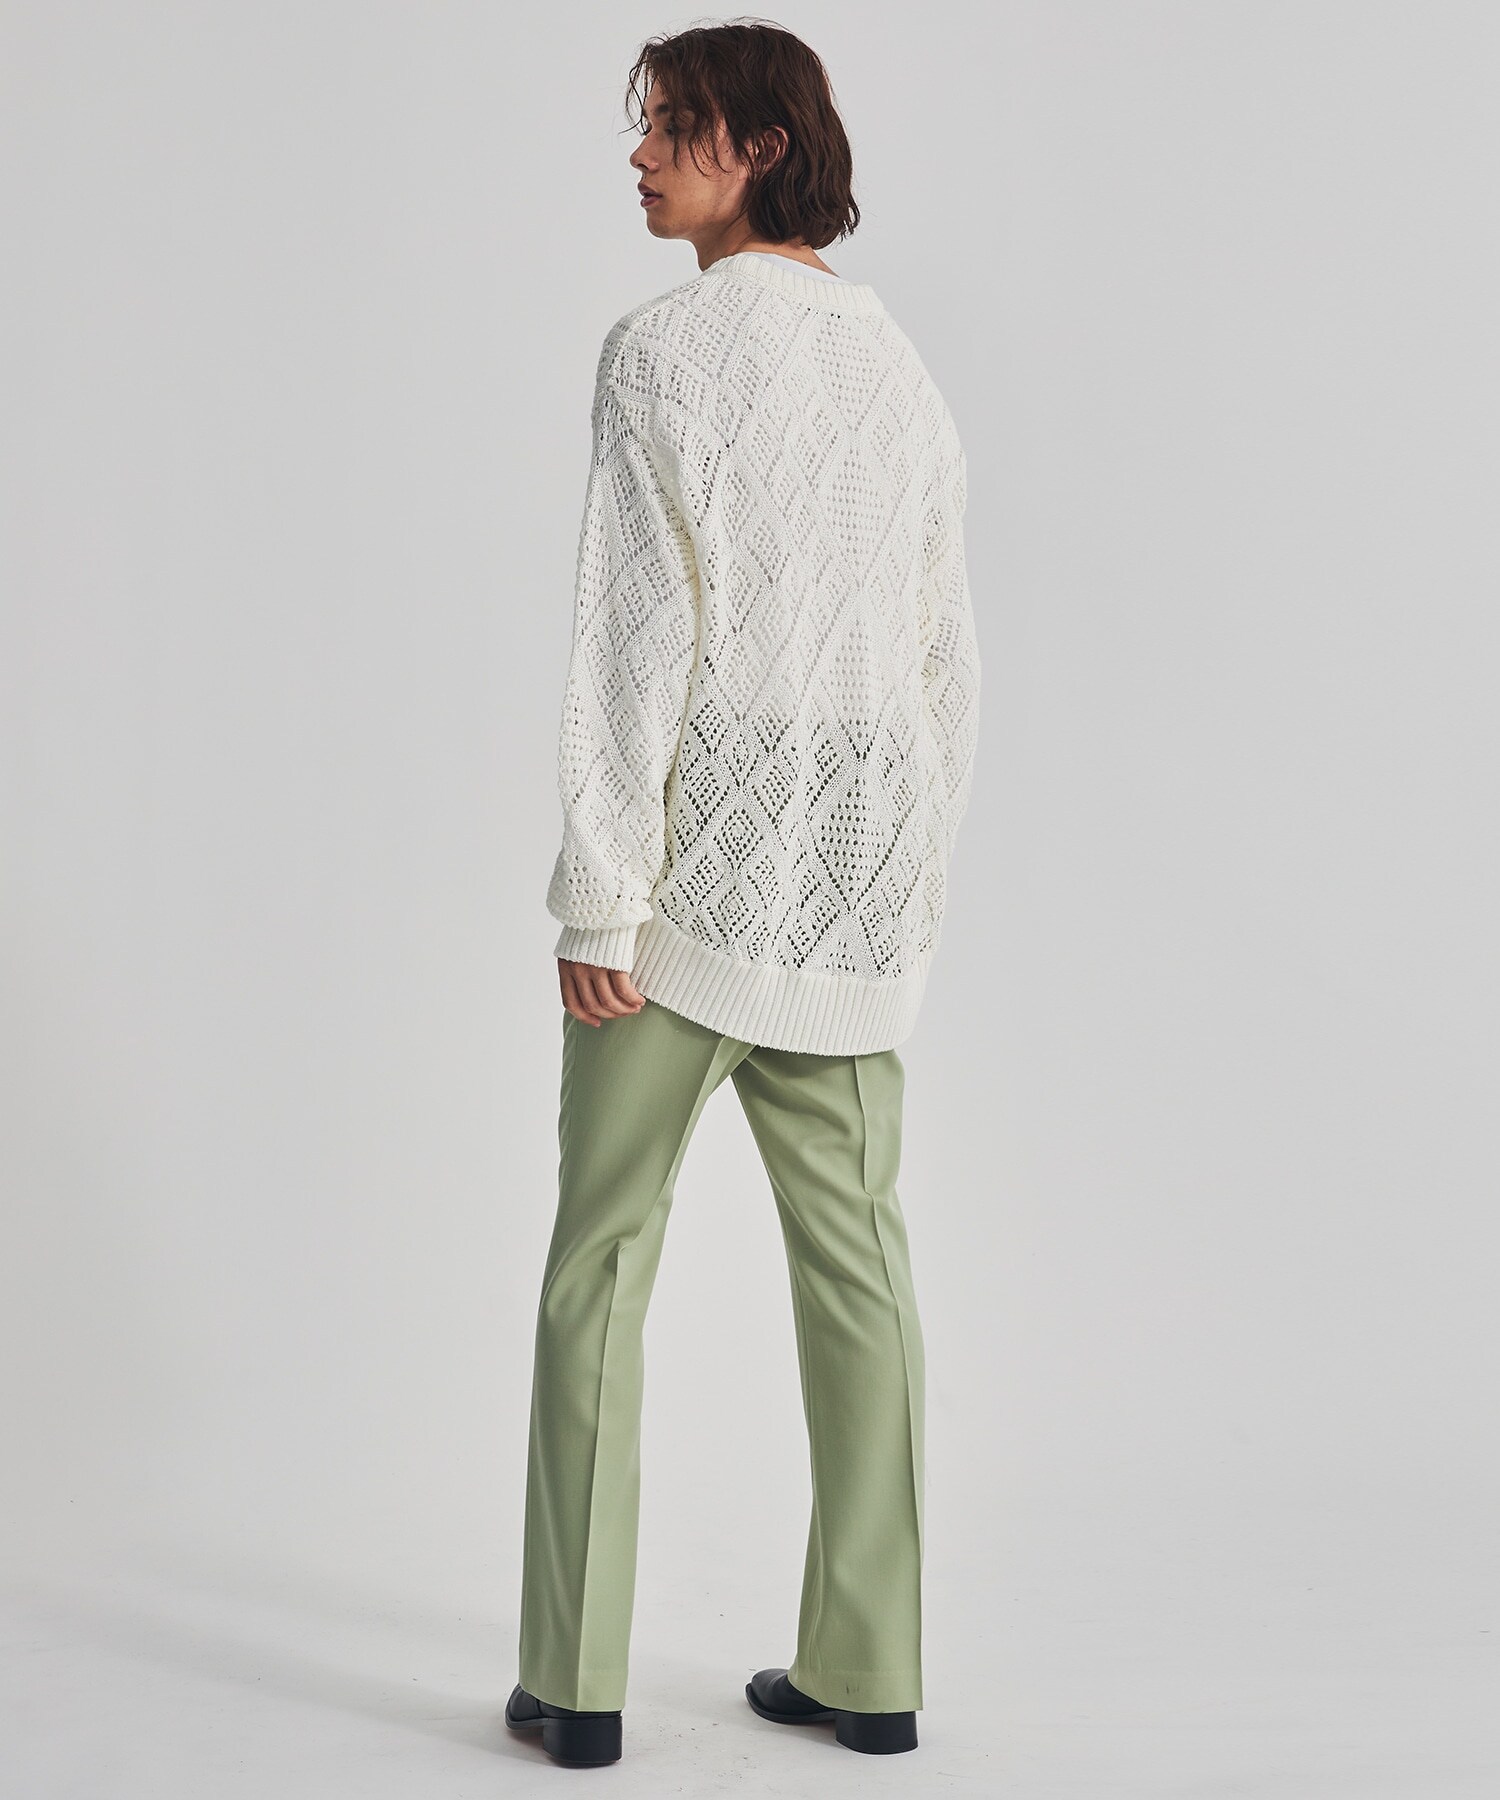 CROCHETED LACE PULLOVER KNIT LiNoH